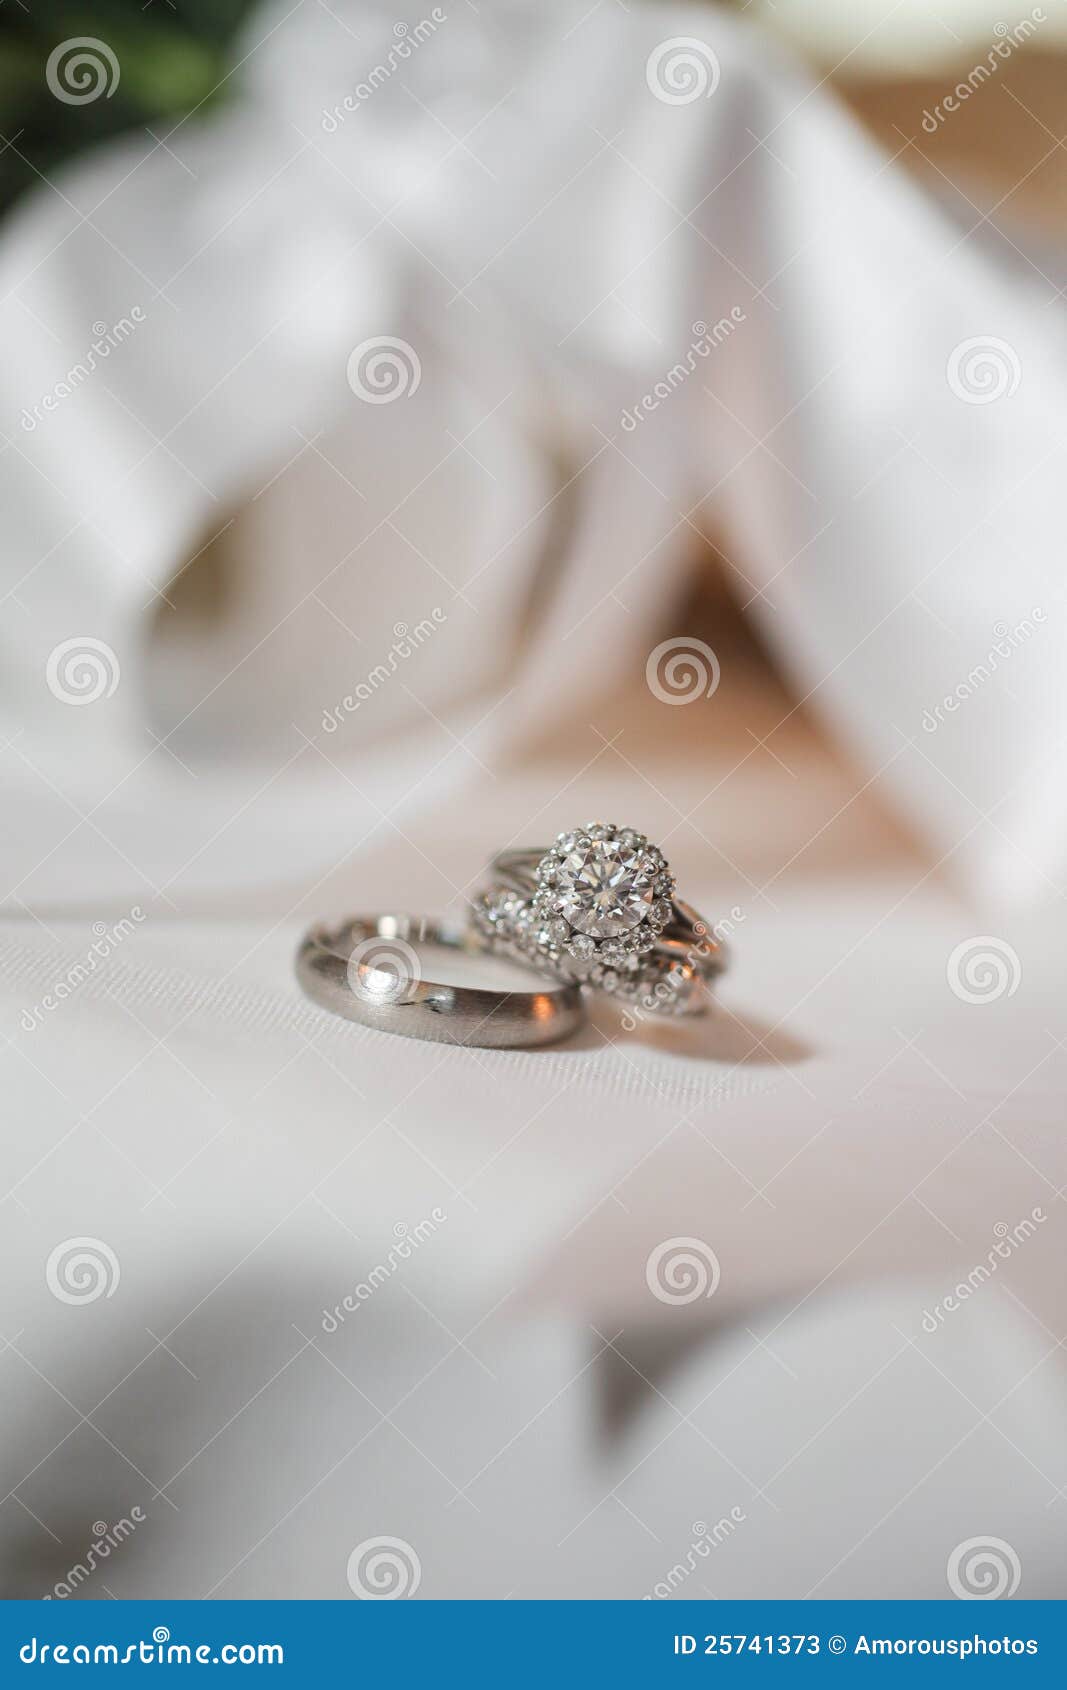 Pair of silver wedding rings with white background.